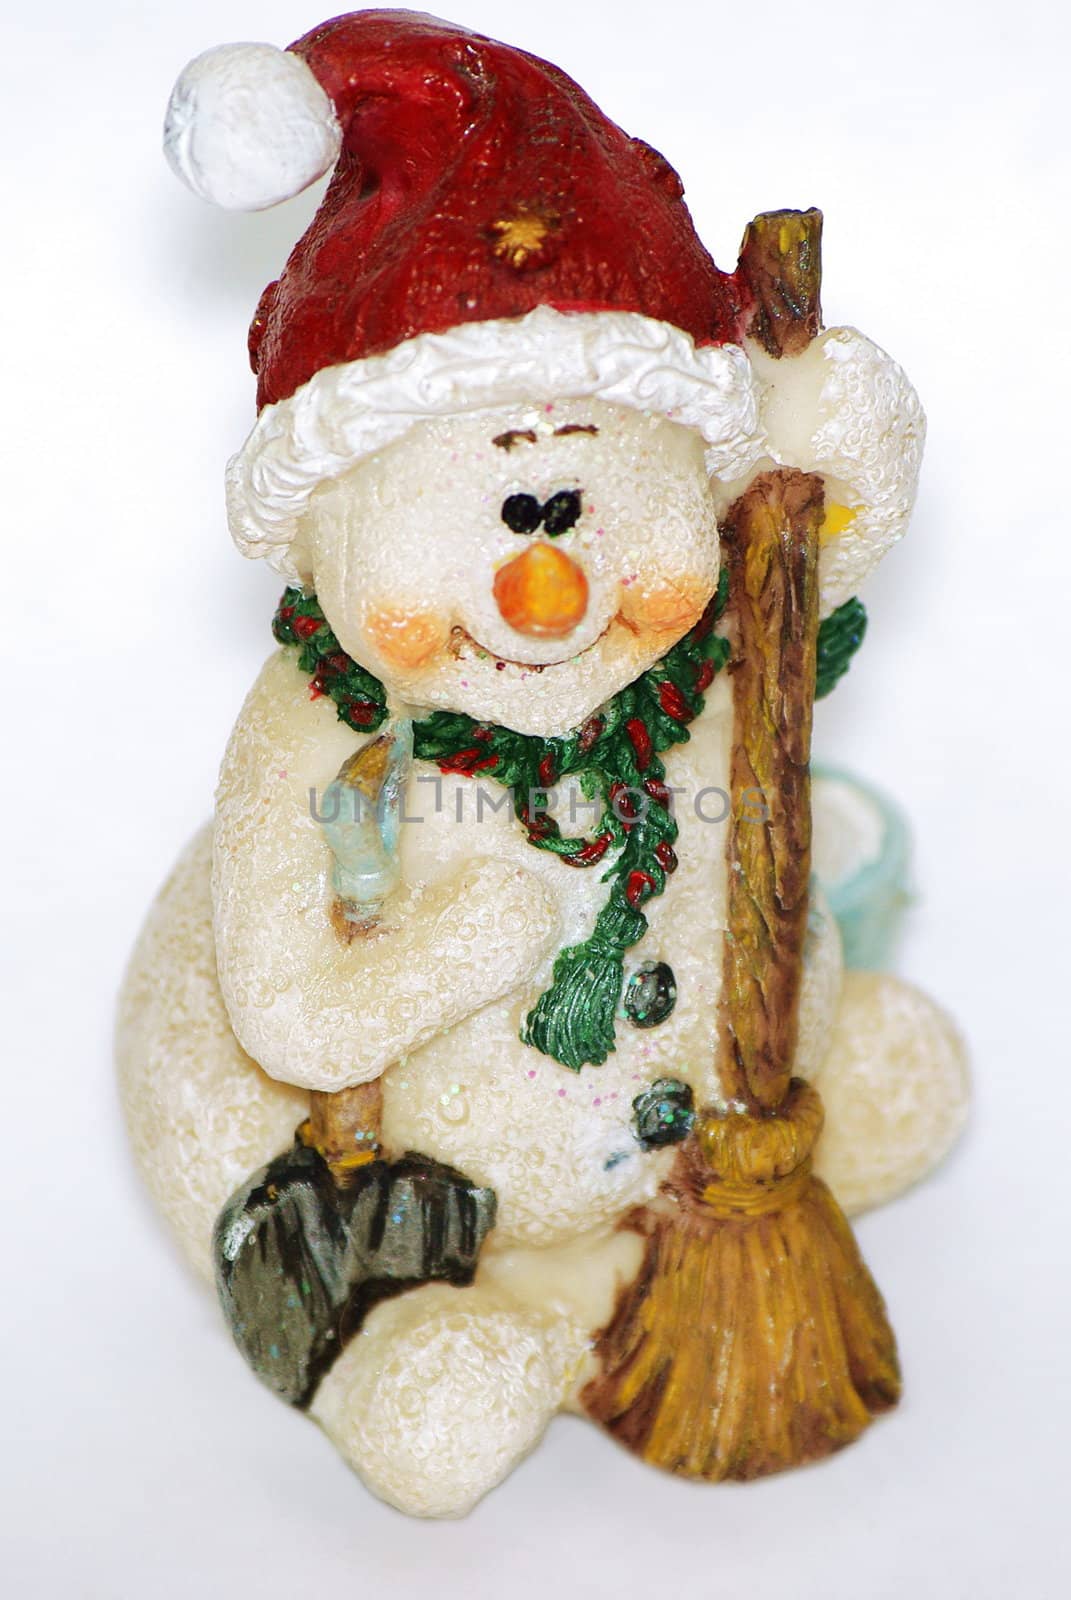 Statuette of snowmen with broom